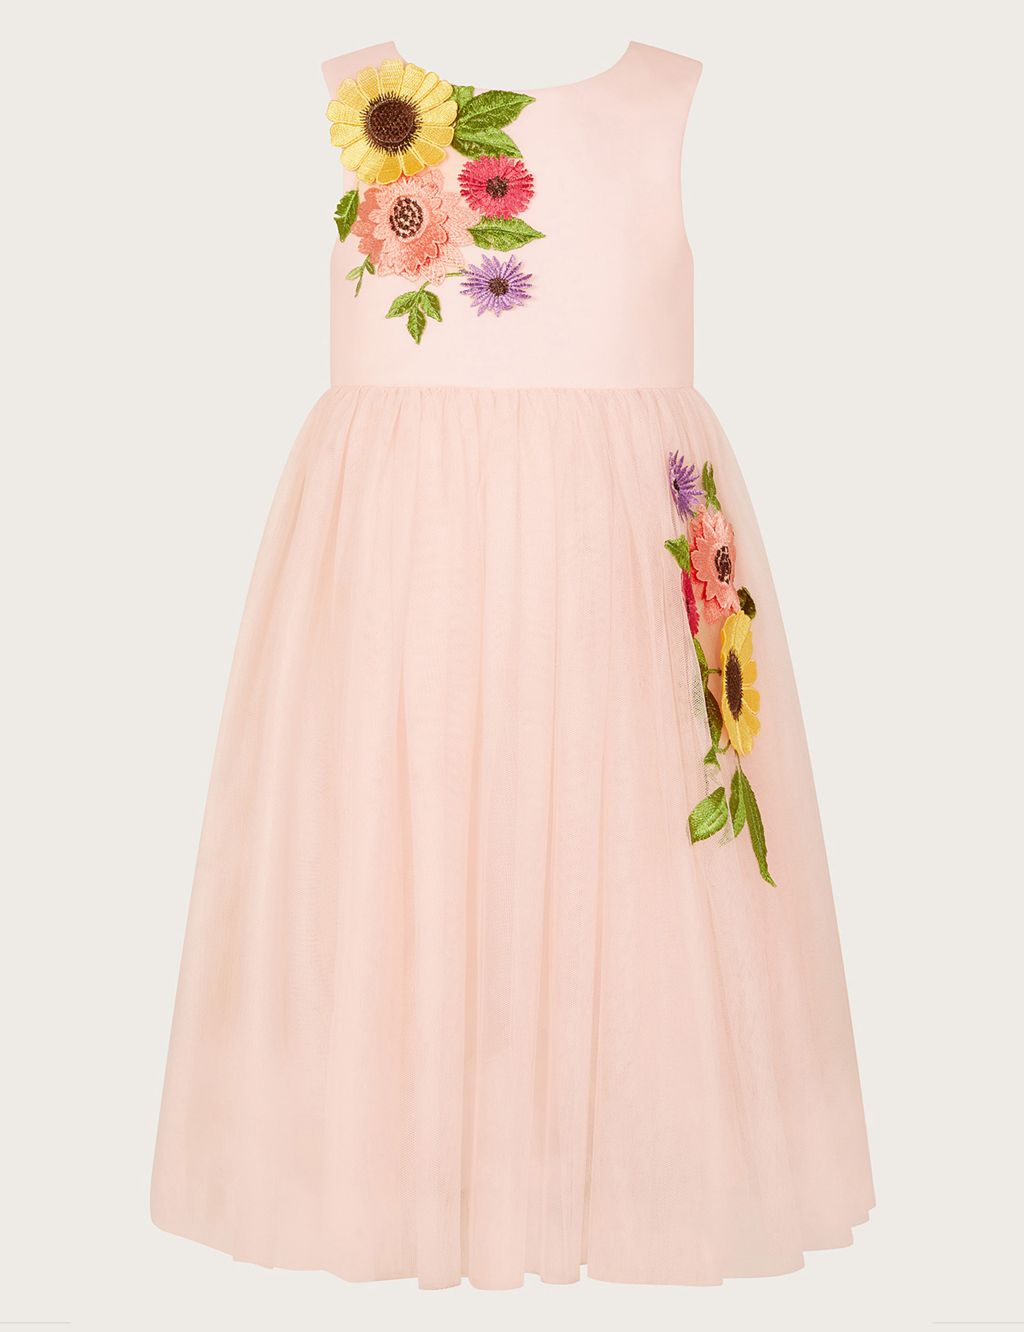 Floral Embroidered Occasion Dress (3-15 Yrs)